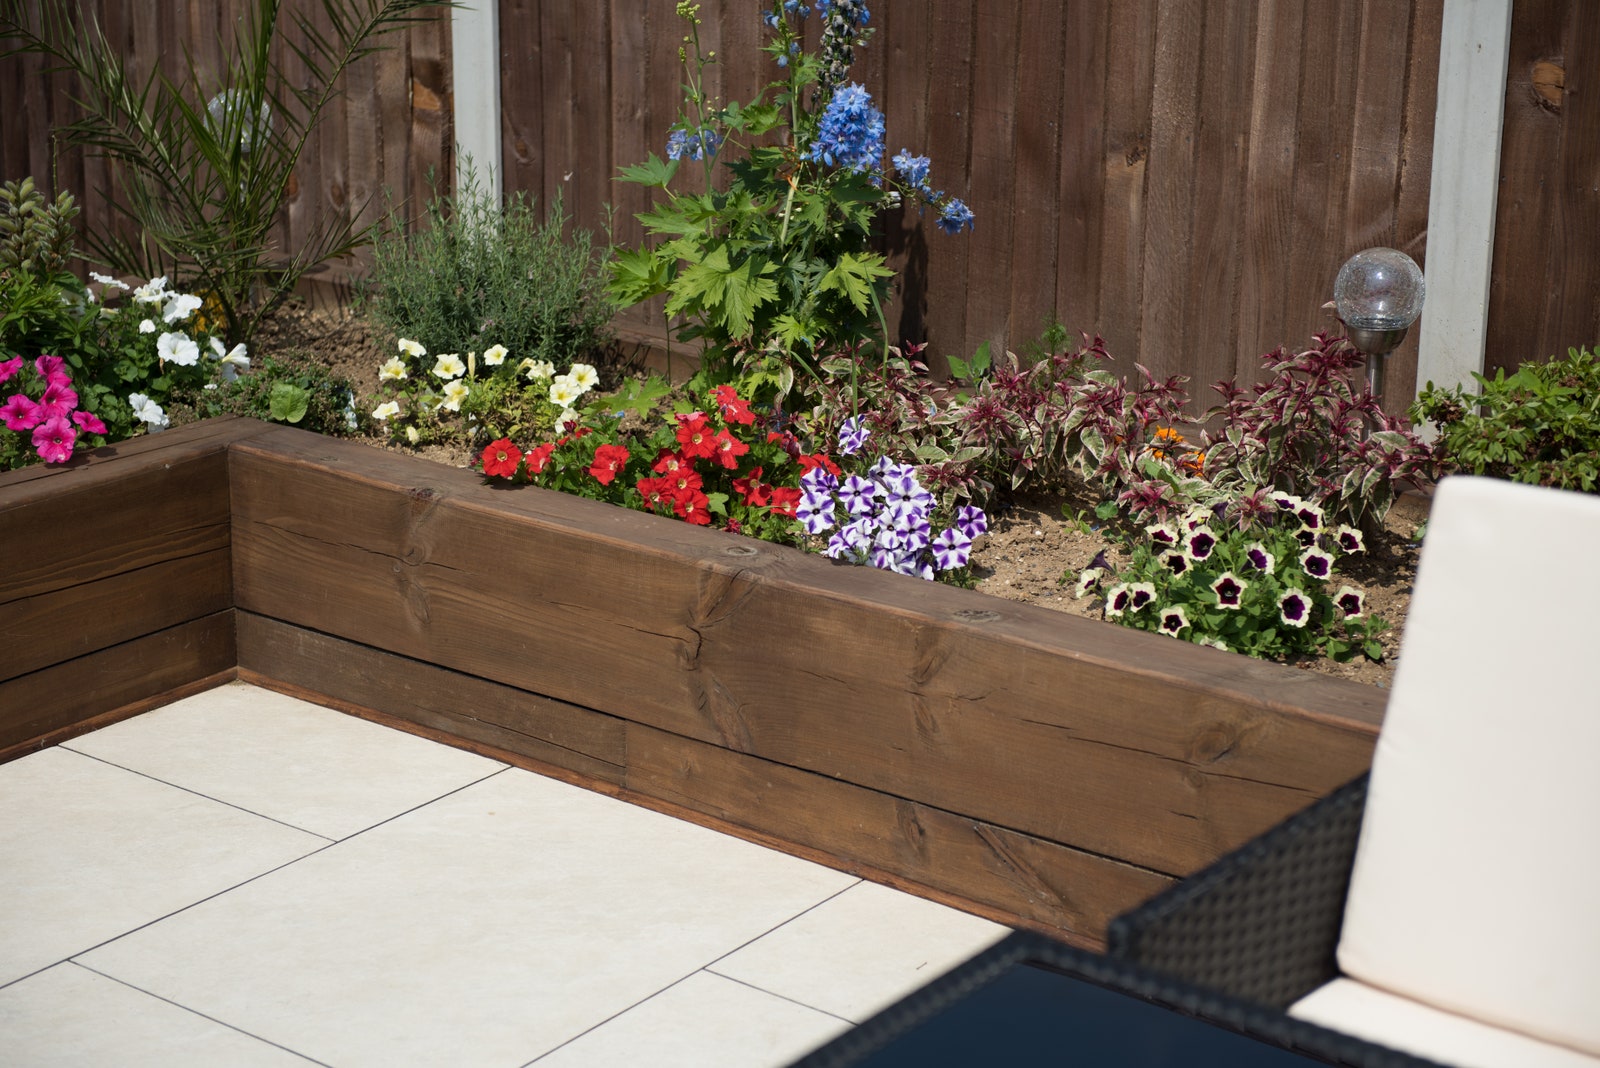 A timber retaining wall hugging a flower bed.